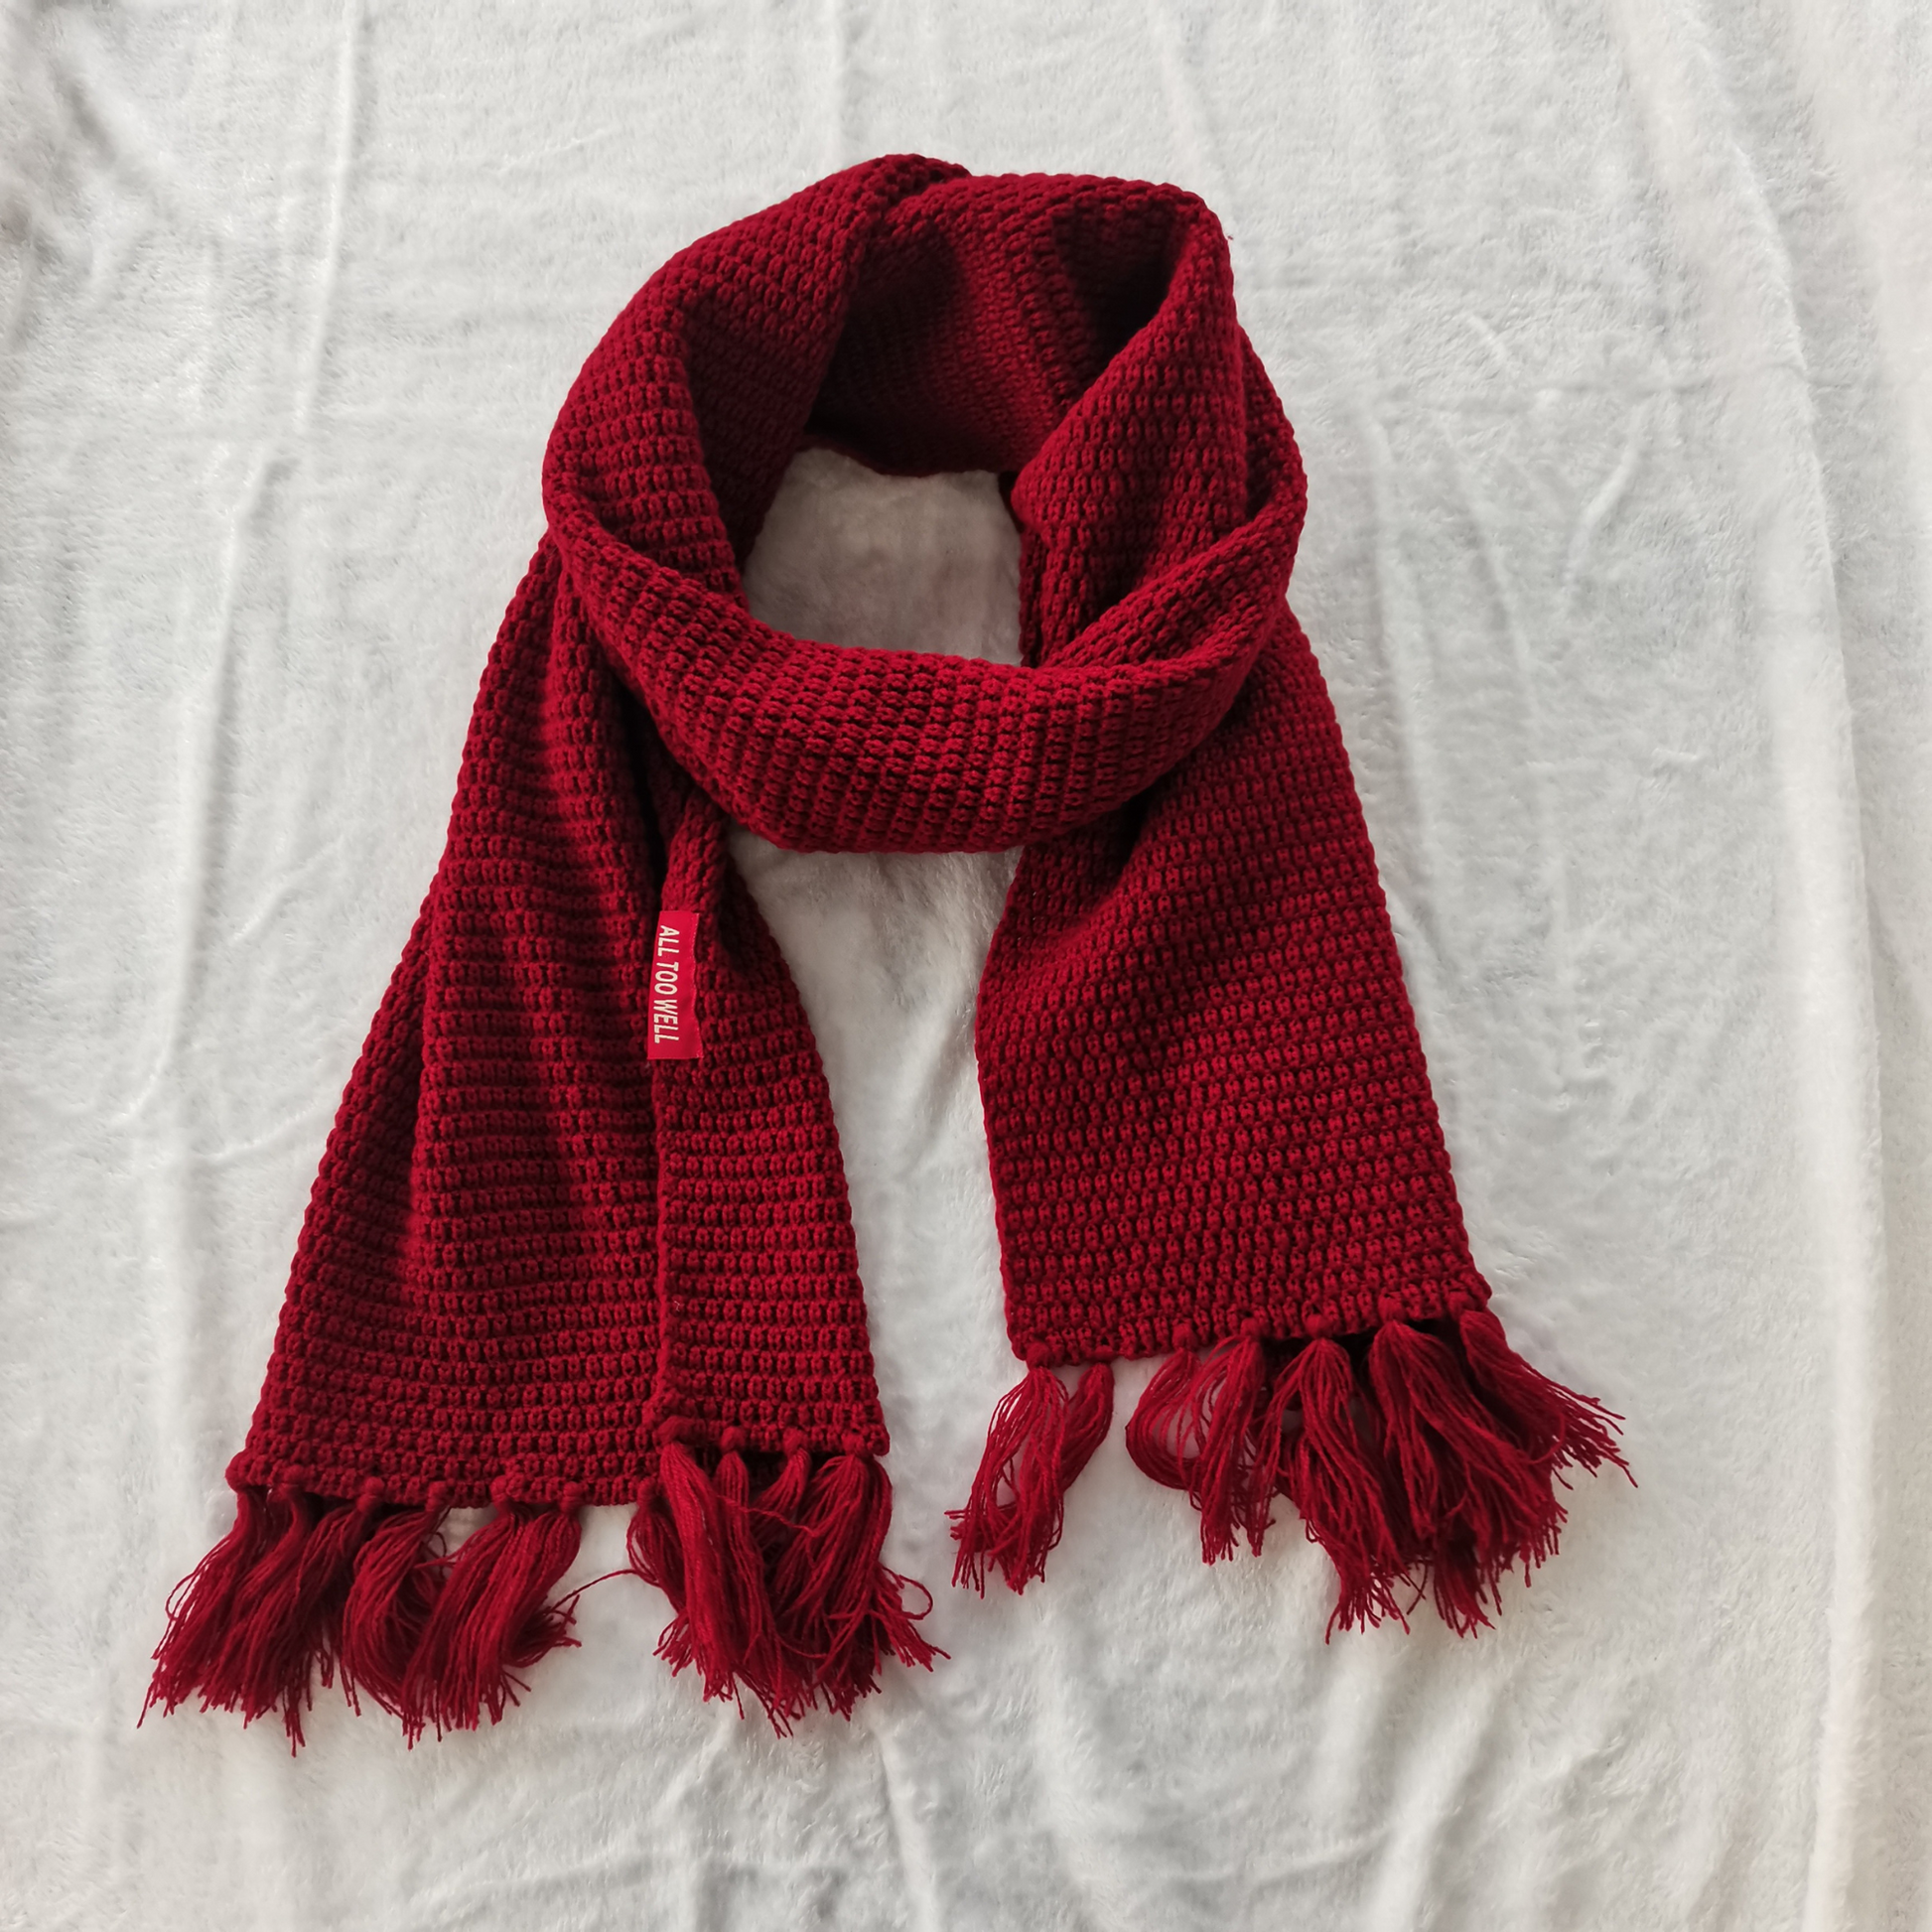 taylor swift red scarf, taylor swift scarf